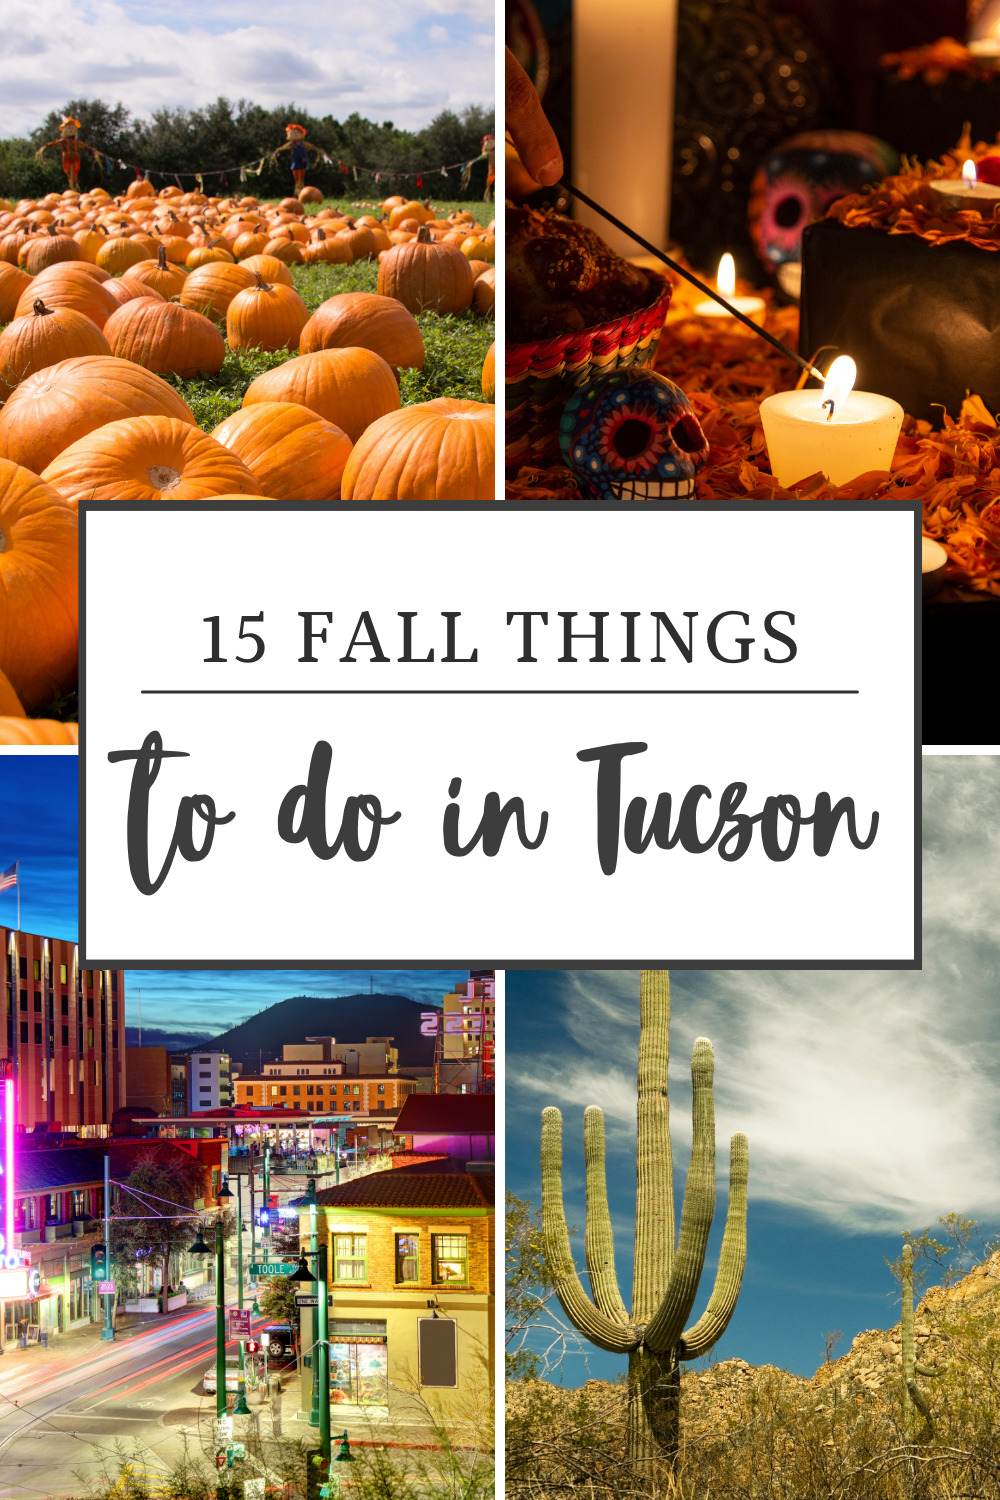 15 fall things to do in tucson